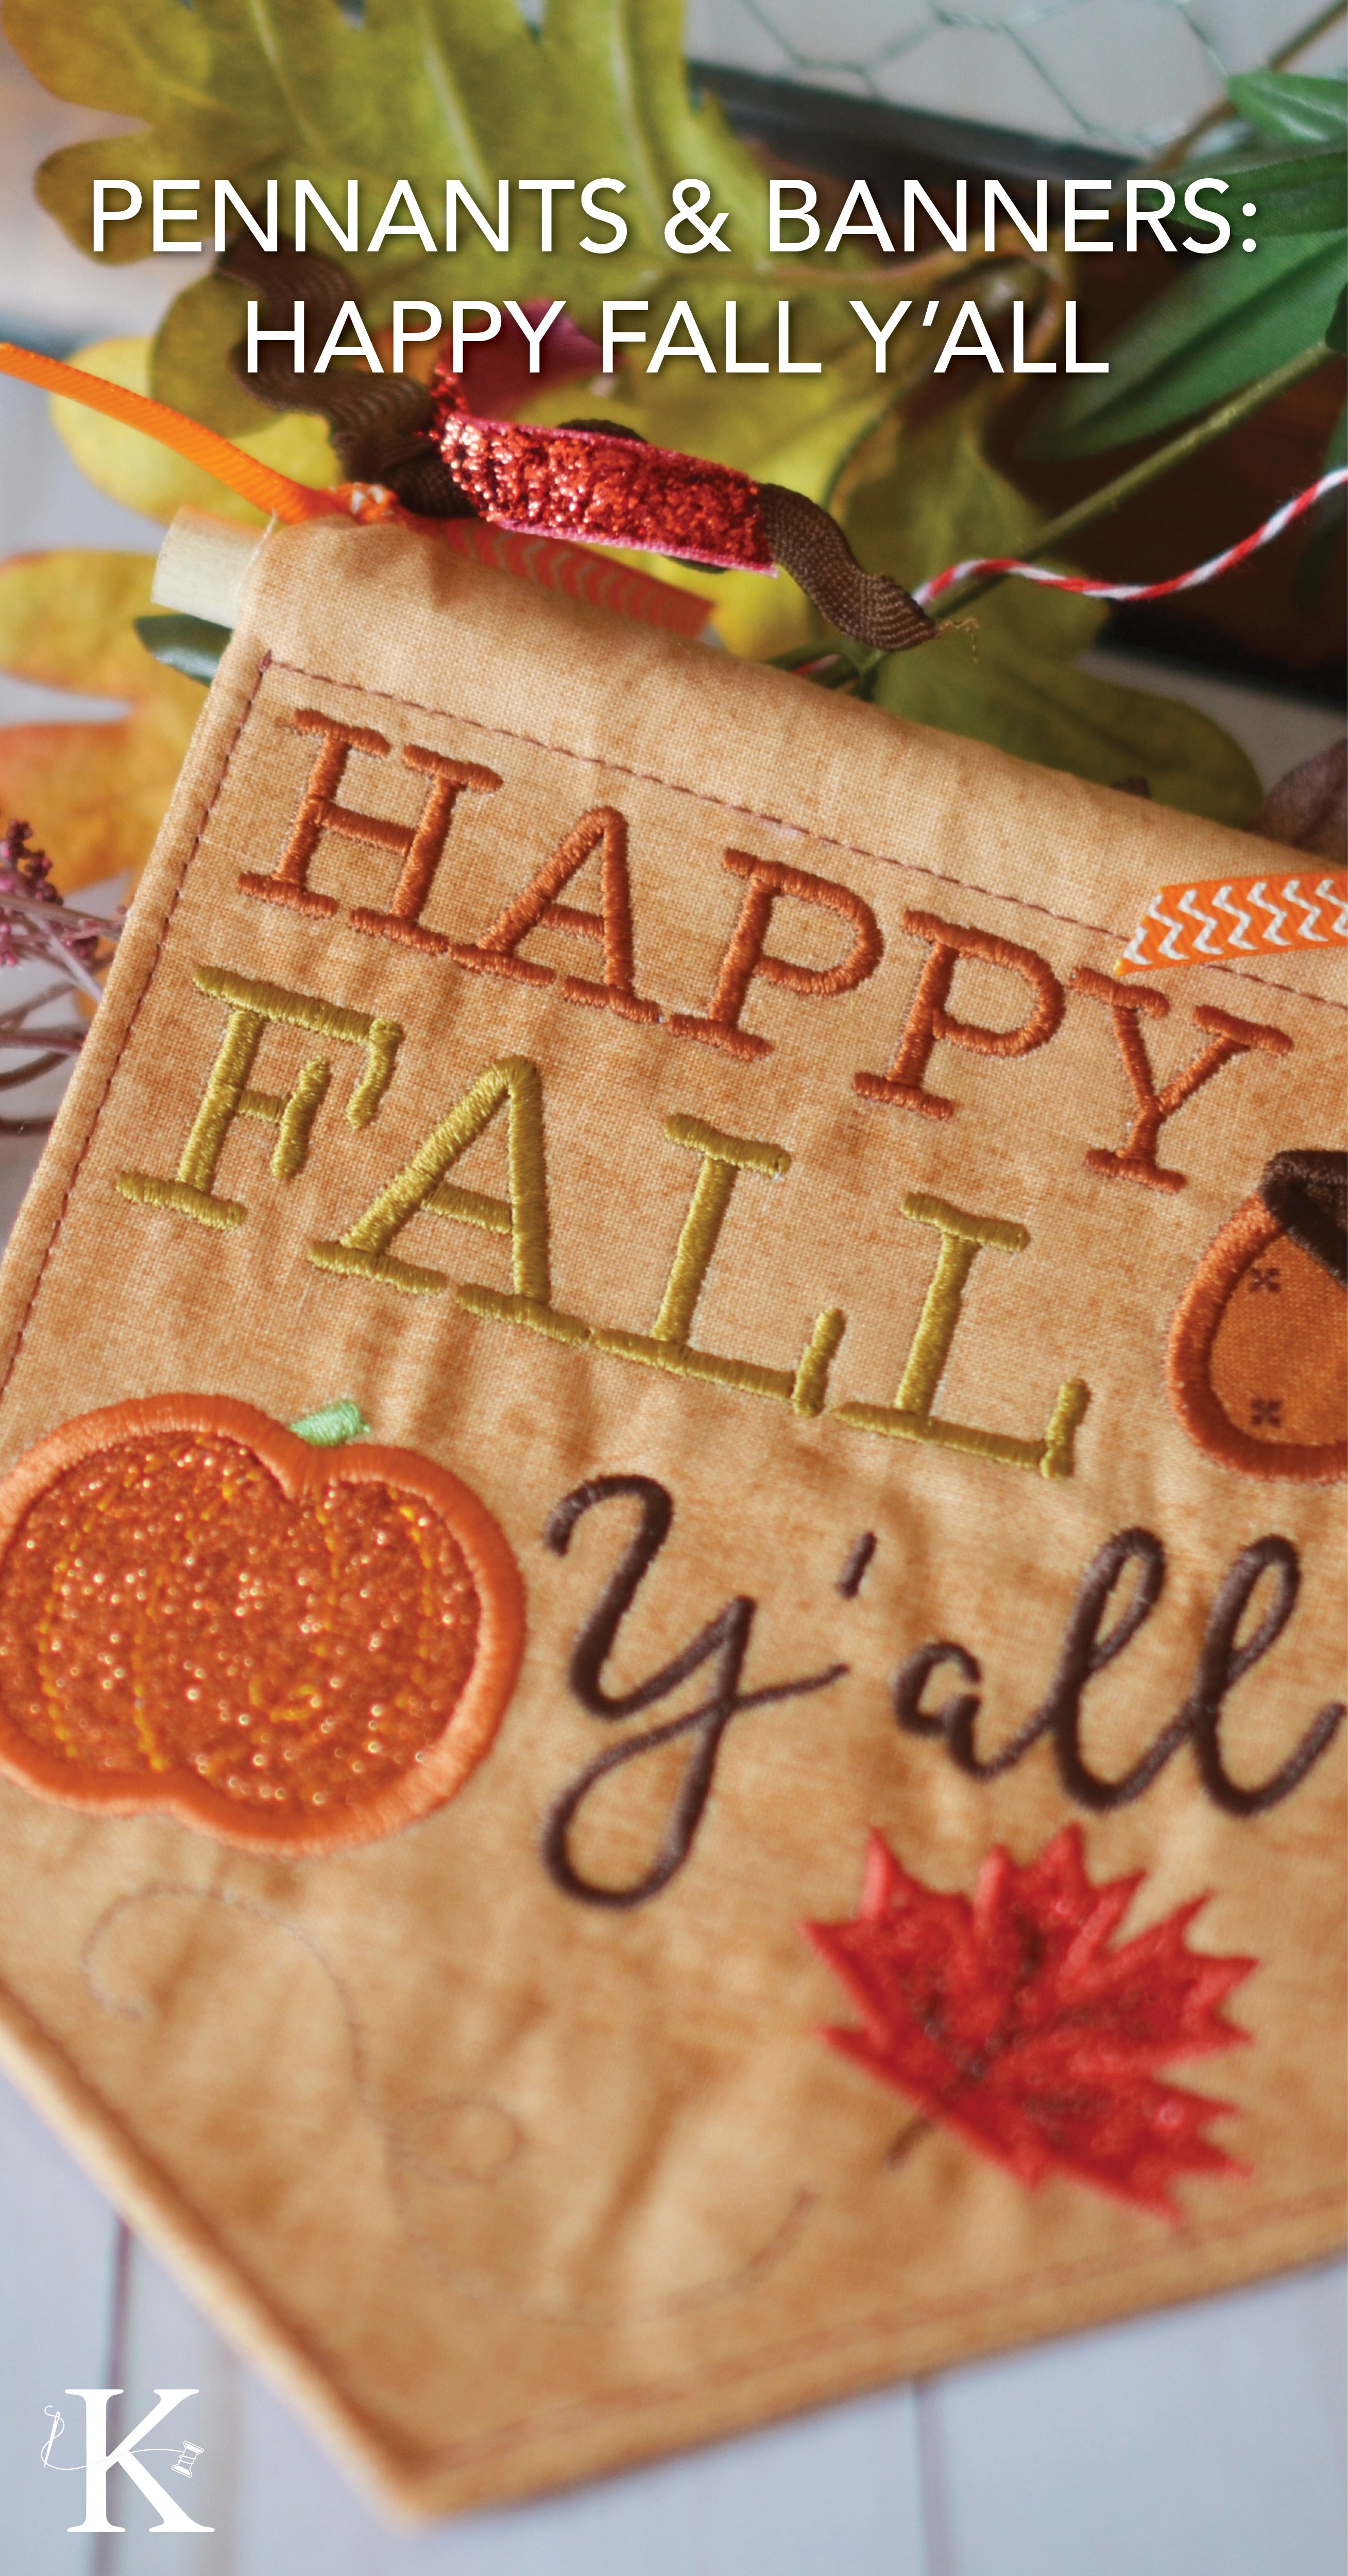 Pennants-Banners-Happy-Fall-Yall